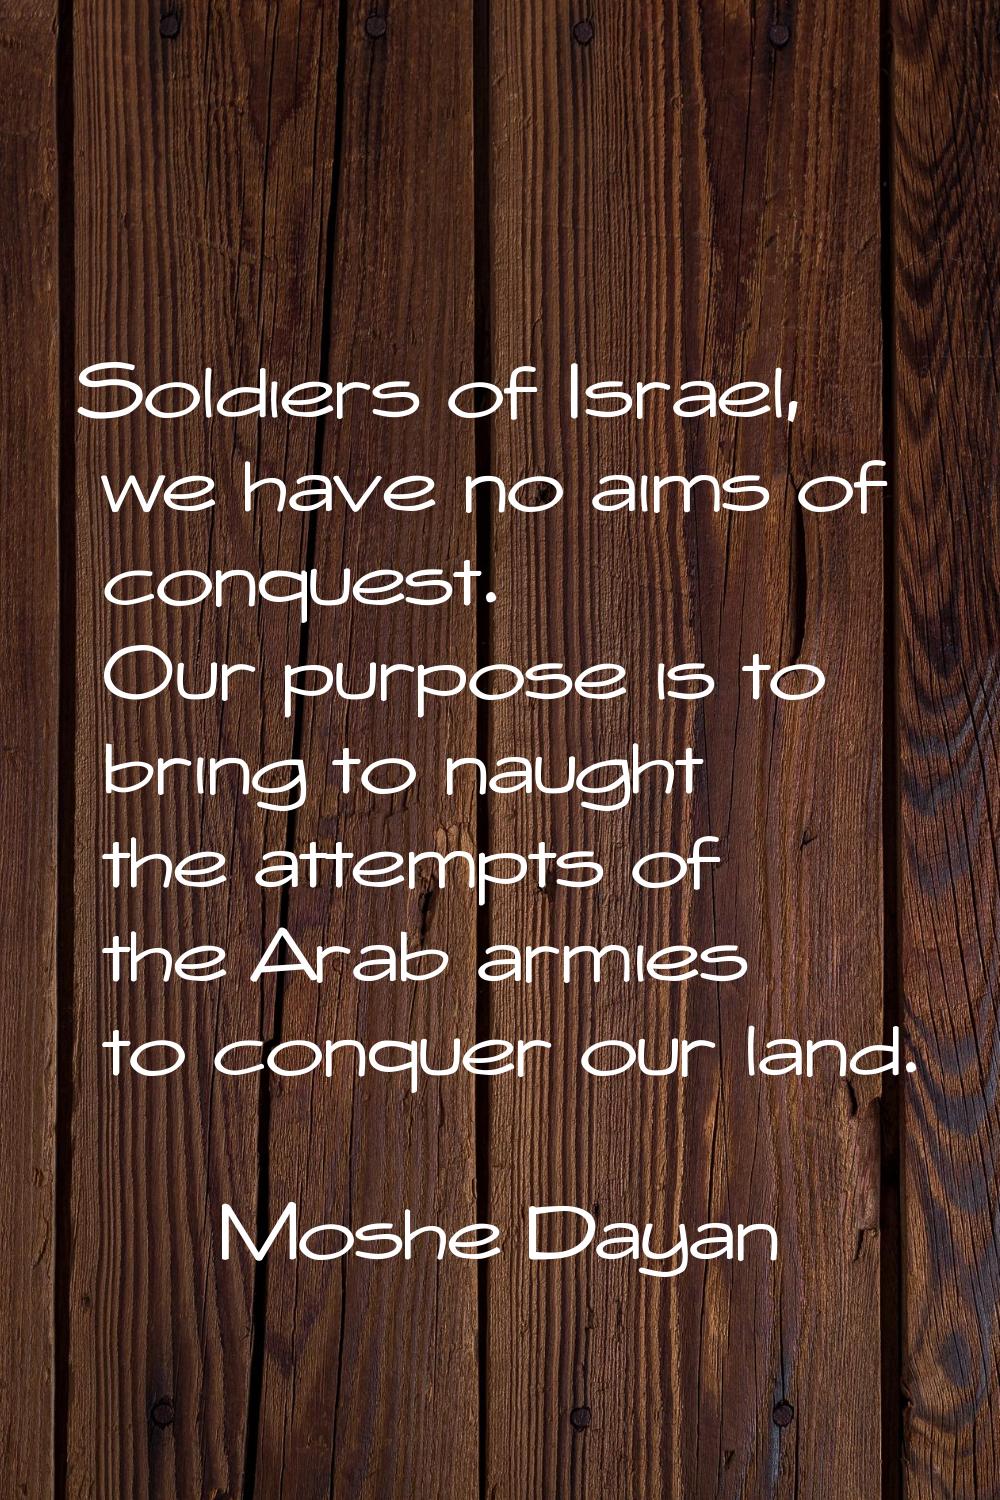 Soldiers of Israel, we have no aims of conquest. Our purpose is to bring to naught the attempts of 